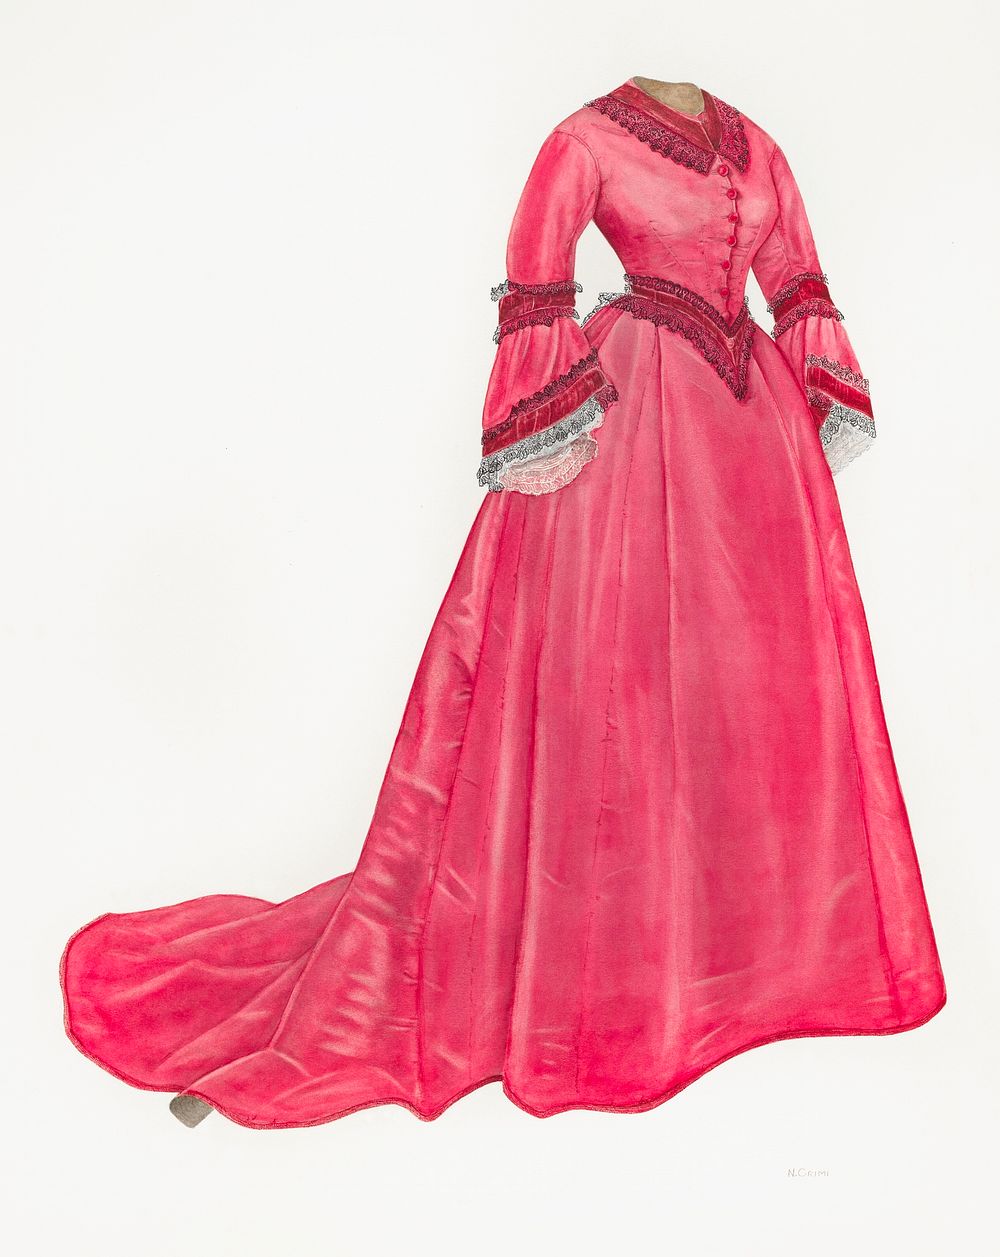 Afternoon Dress (ca. 1935&ndash;1942) by Nancy Crimi. Original from The National Galley of Art. Digitally enhanced by…